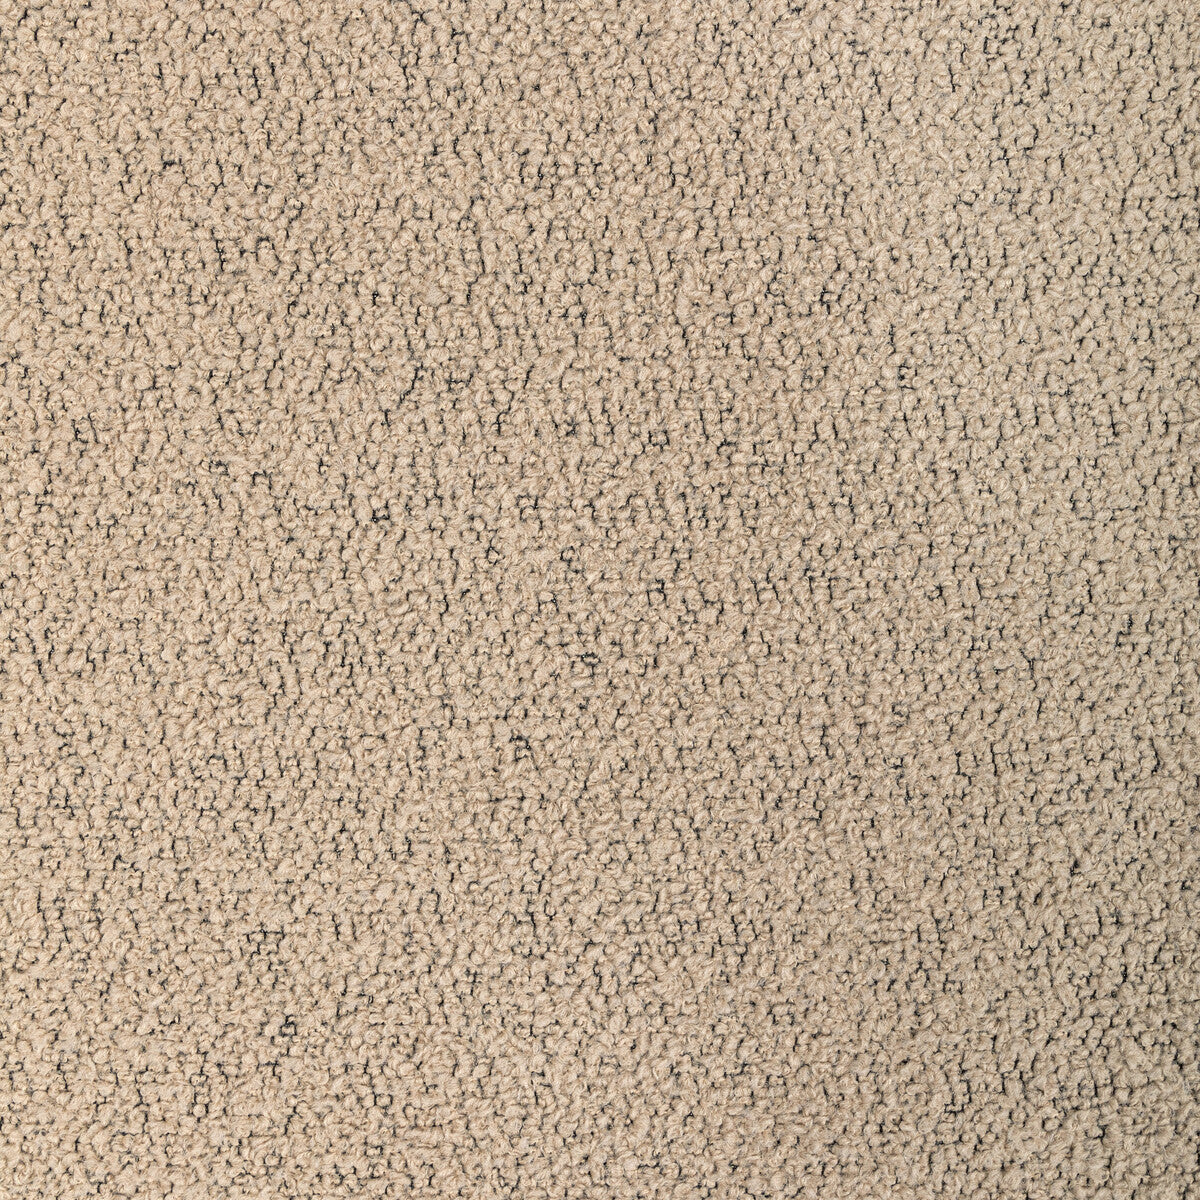 Namaste Boucle fabric in calm beige color - pattern 36388.106.0 - by Kravet Design in the Crypton Home - Celliant collection